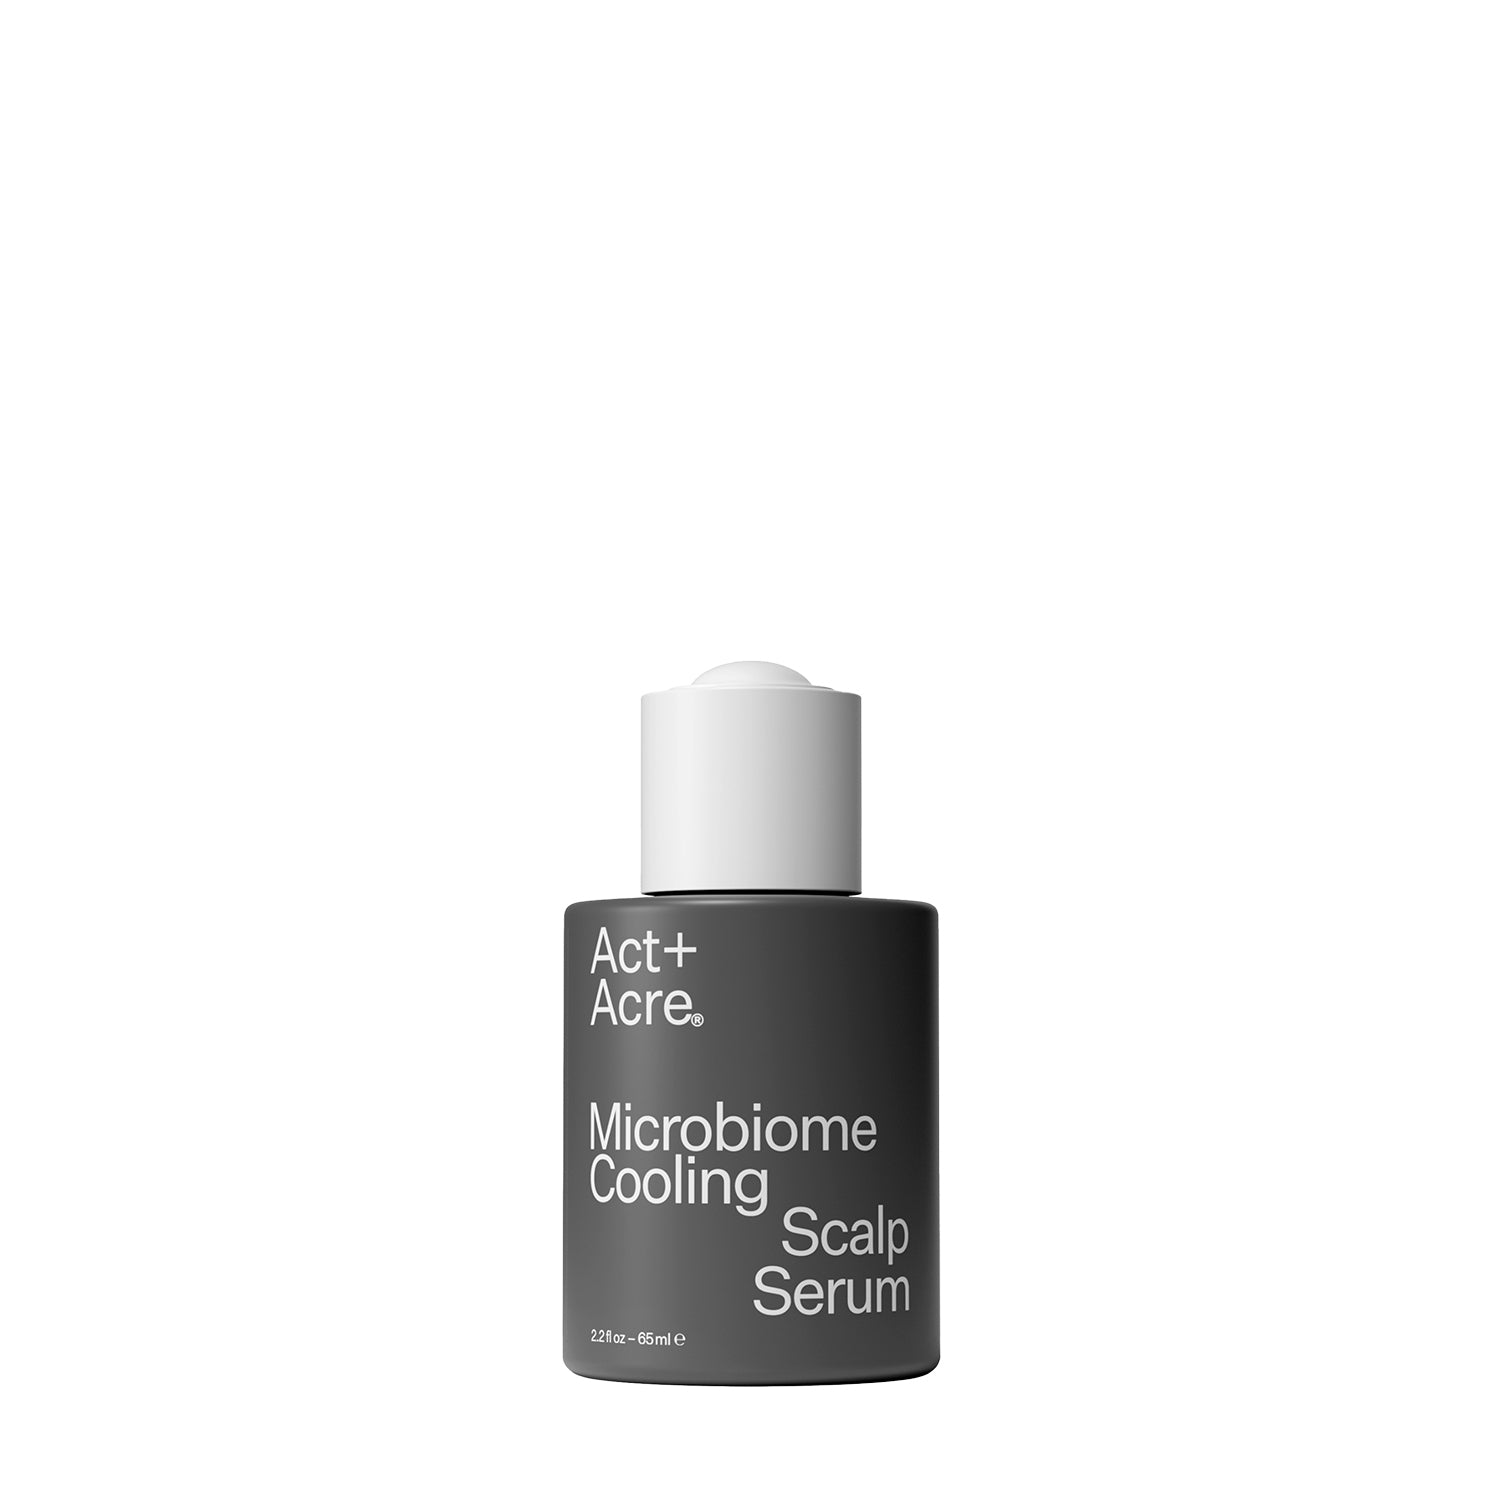 Microbiome Cooling Scalp Serum